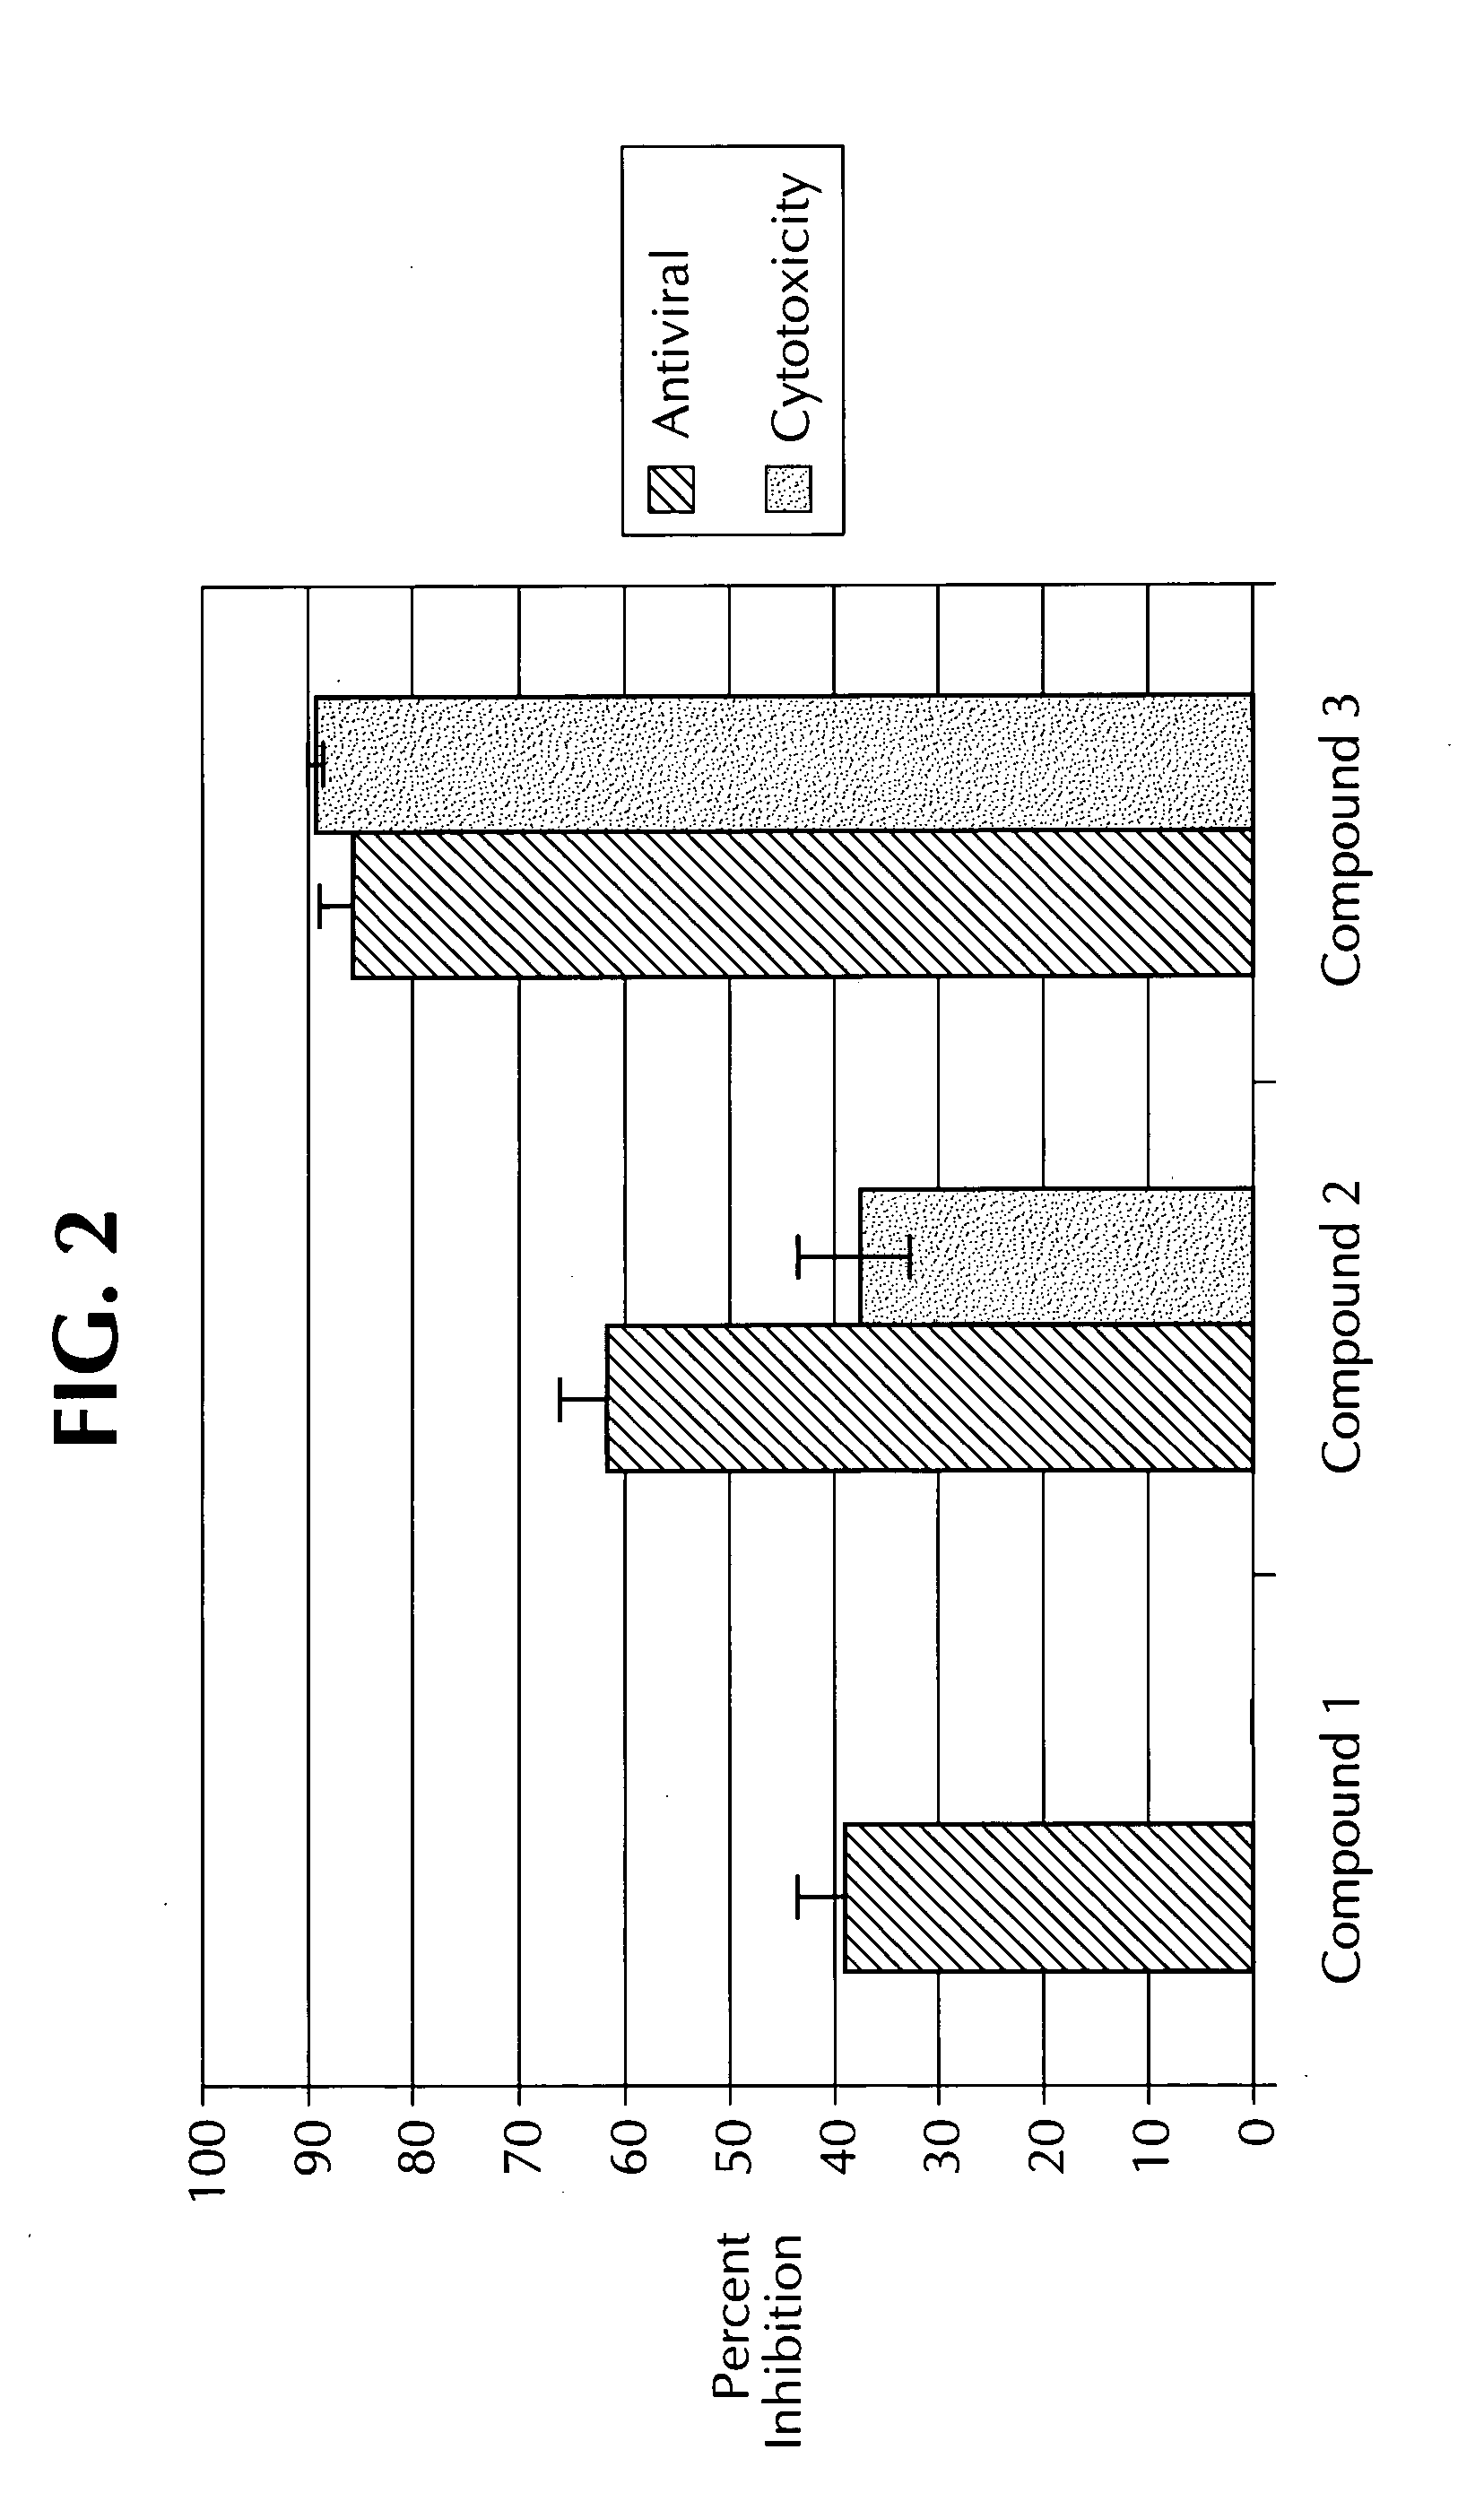 Dual assay for evaluating activity and cytotoxicity of compounds in the same population of cells